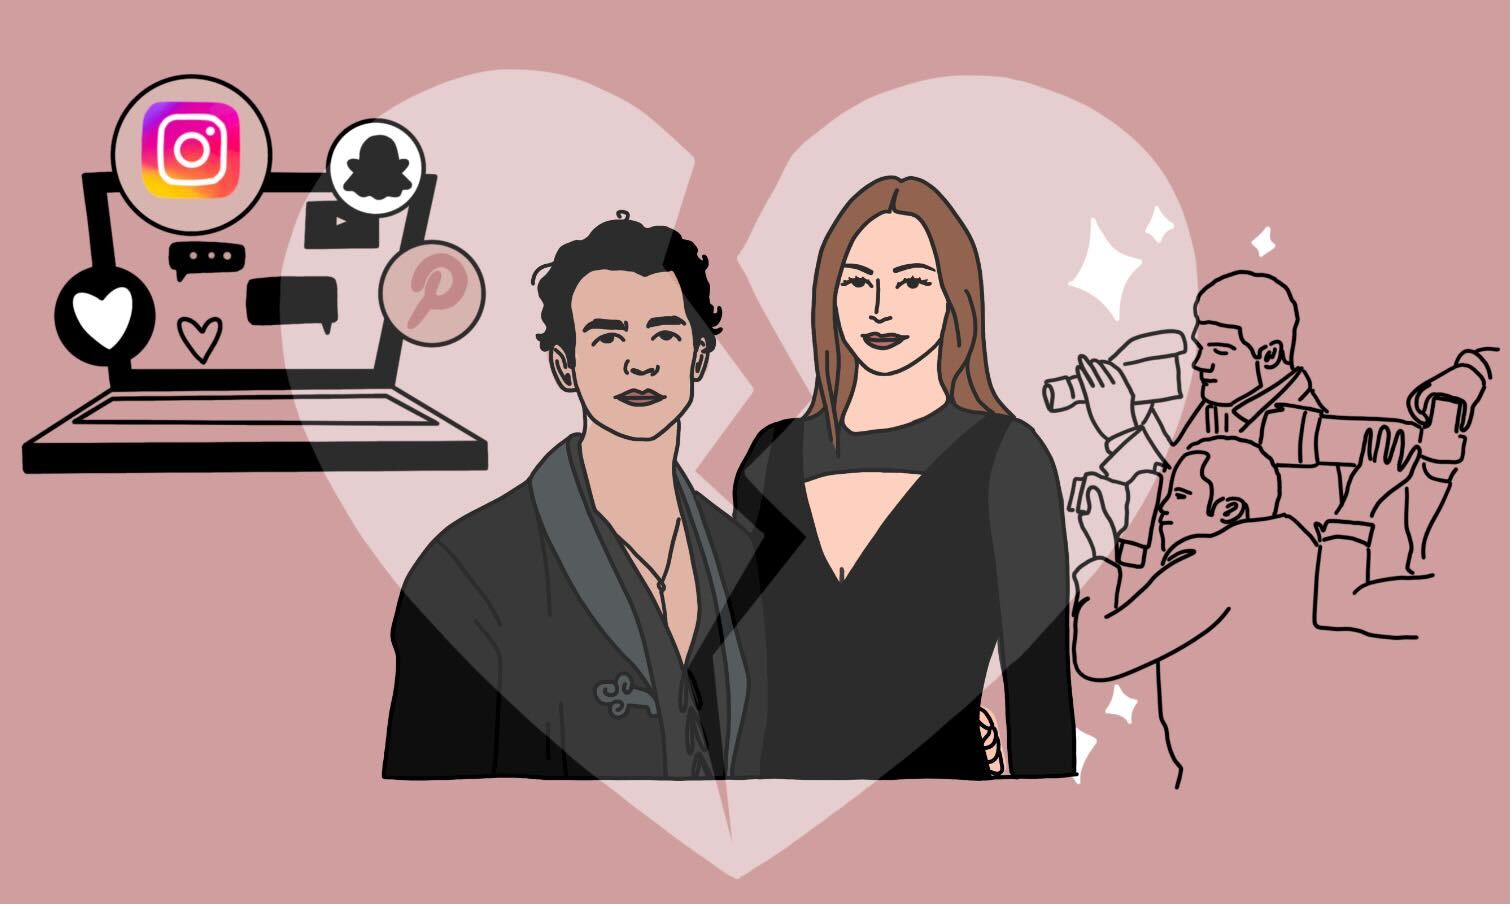 This year multiple popular celebrity couples have broken up causing devastated fans and a social media frenzy. The breakups have started a debate on the impact of obsession with celebrities.